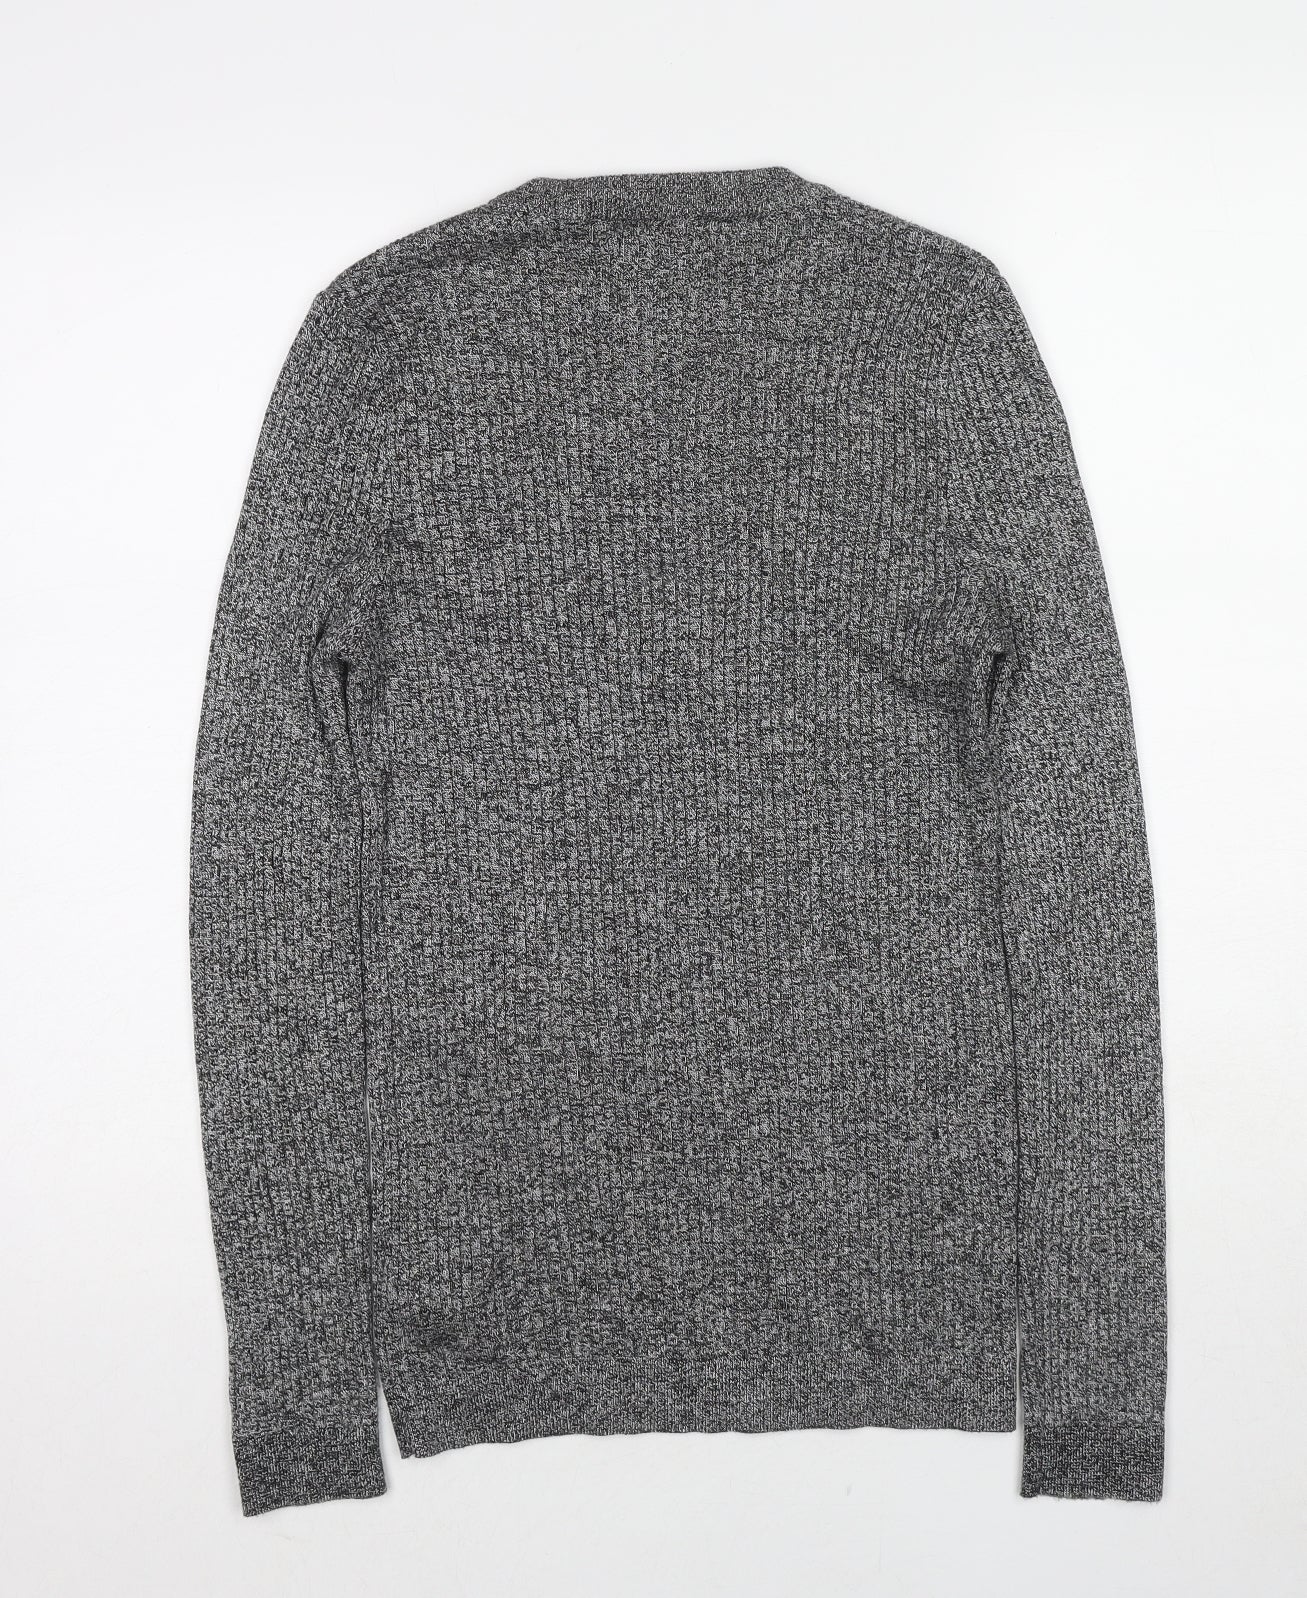 Topman Mens Grey Round Neck Acrylic Pullover Jumper Size M Long Sleeve